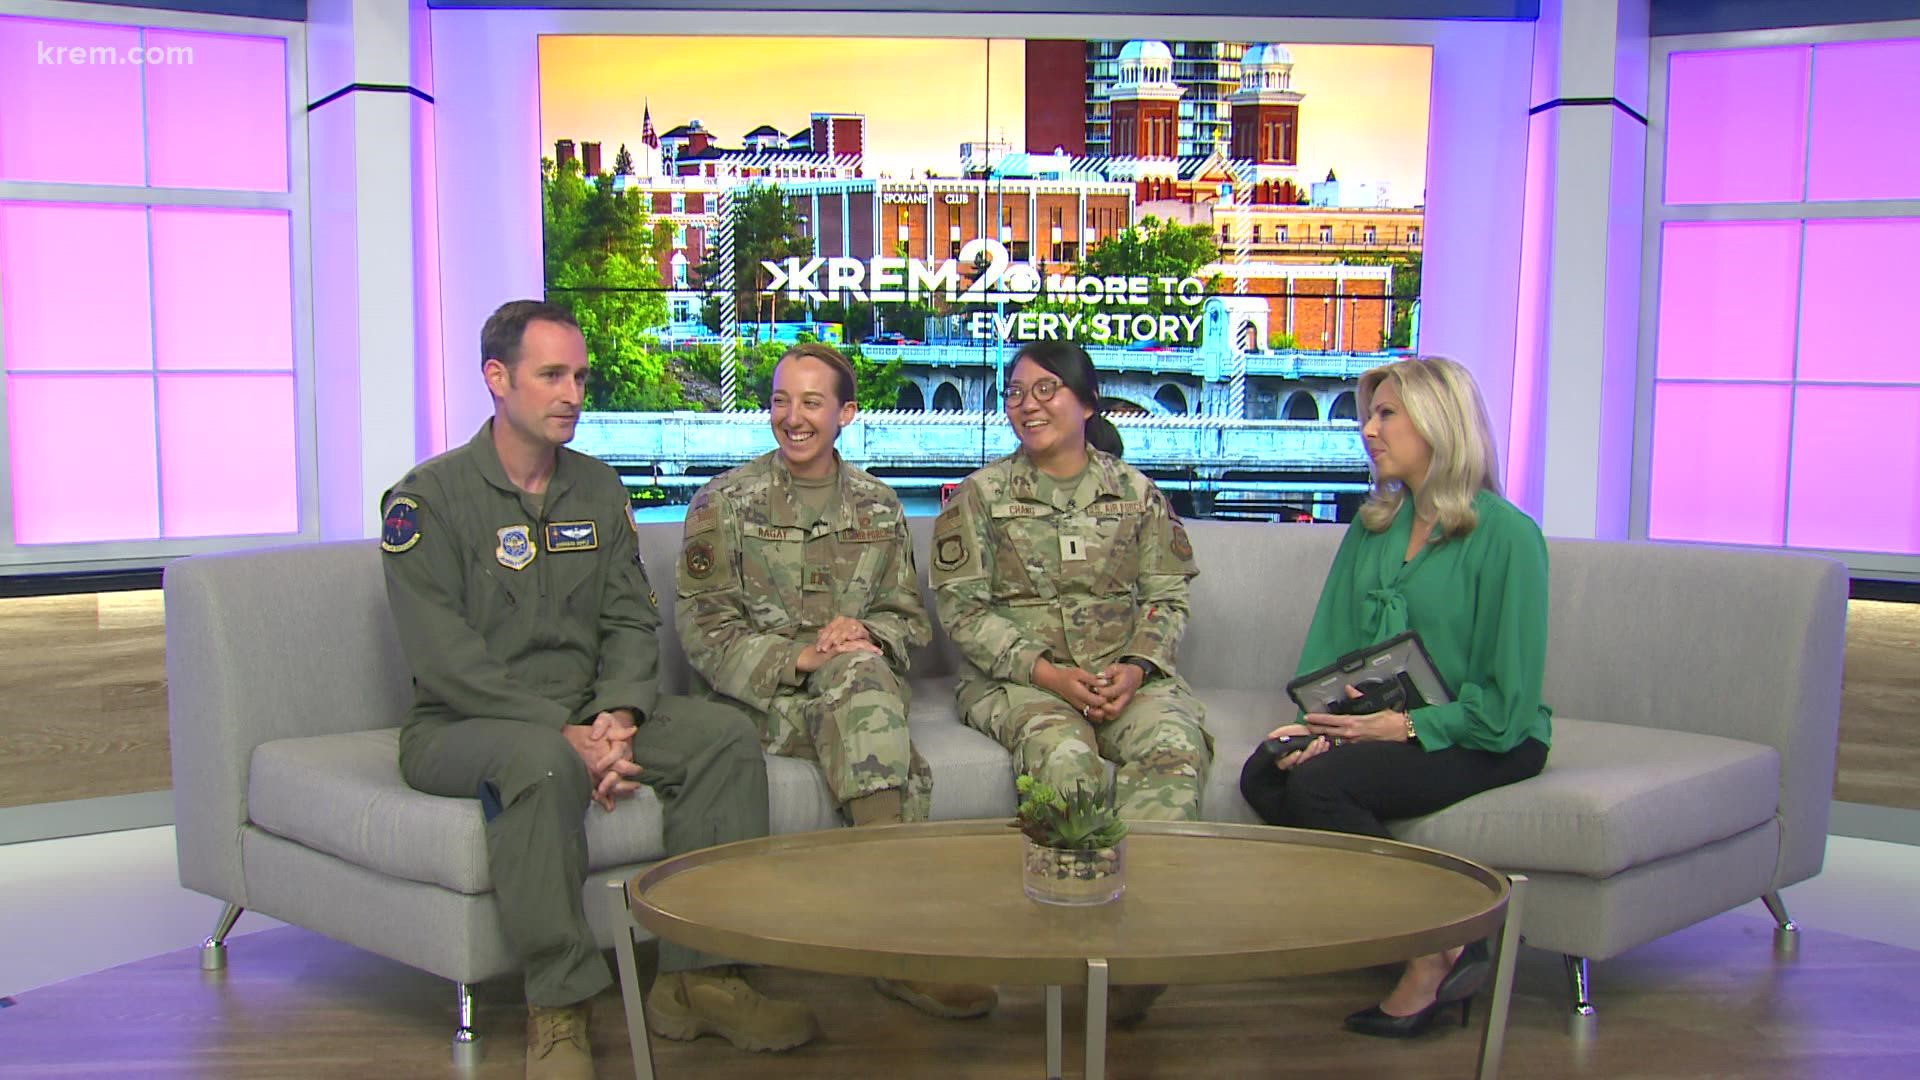 Skyfest is returning to Fairchild Airforce Base in Spokane. Fairchild staff visited the KREM 2 studio to talk more about the shows taking place this weekend.